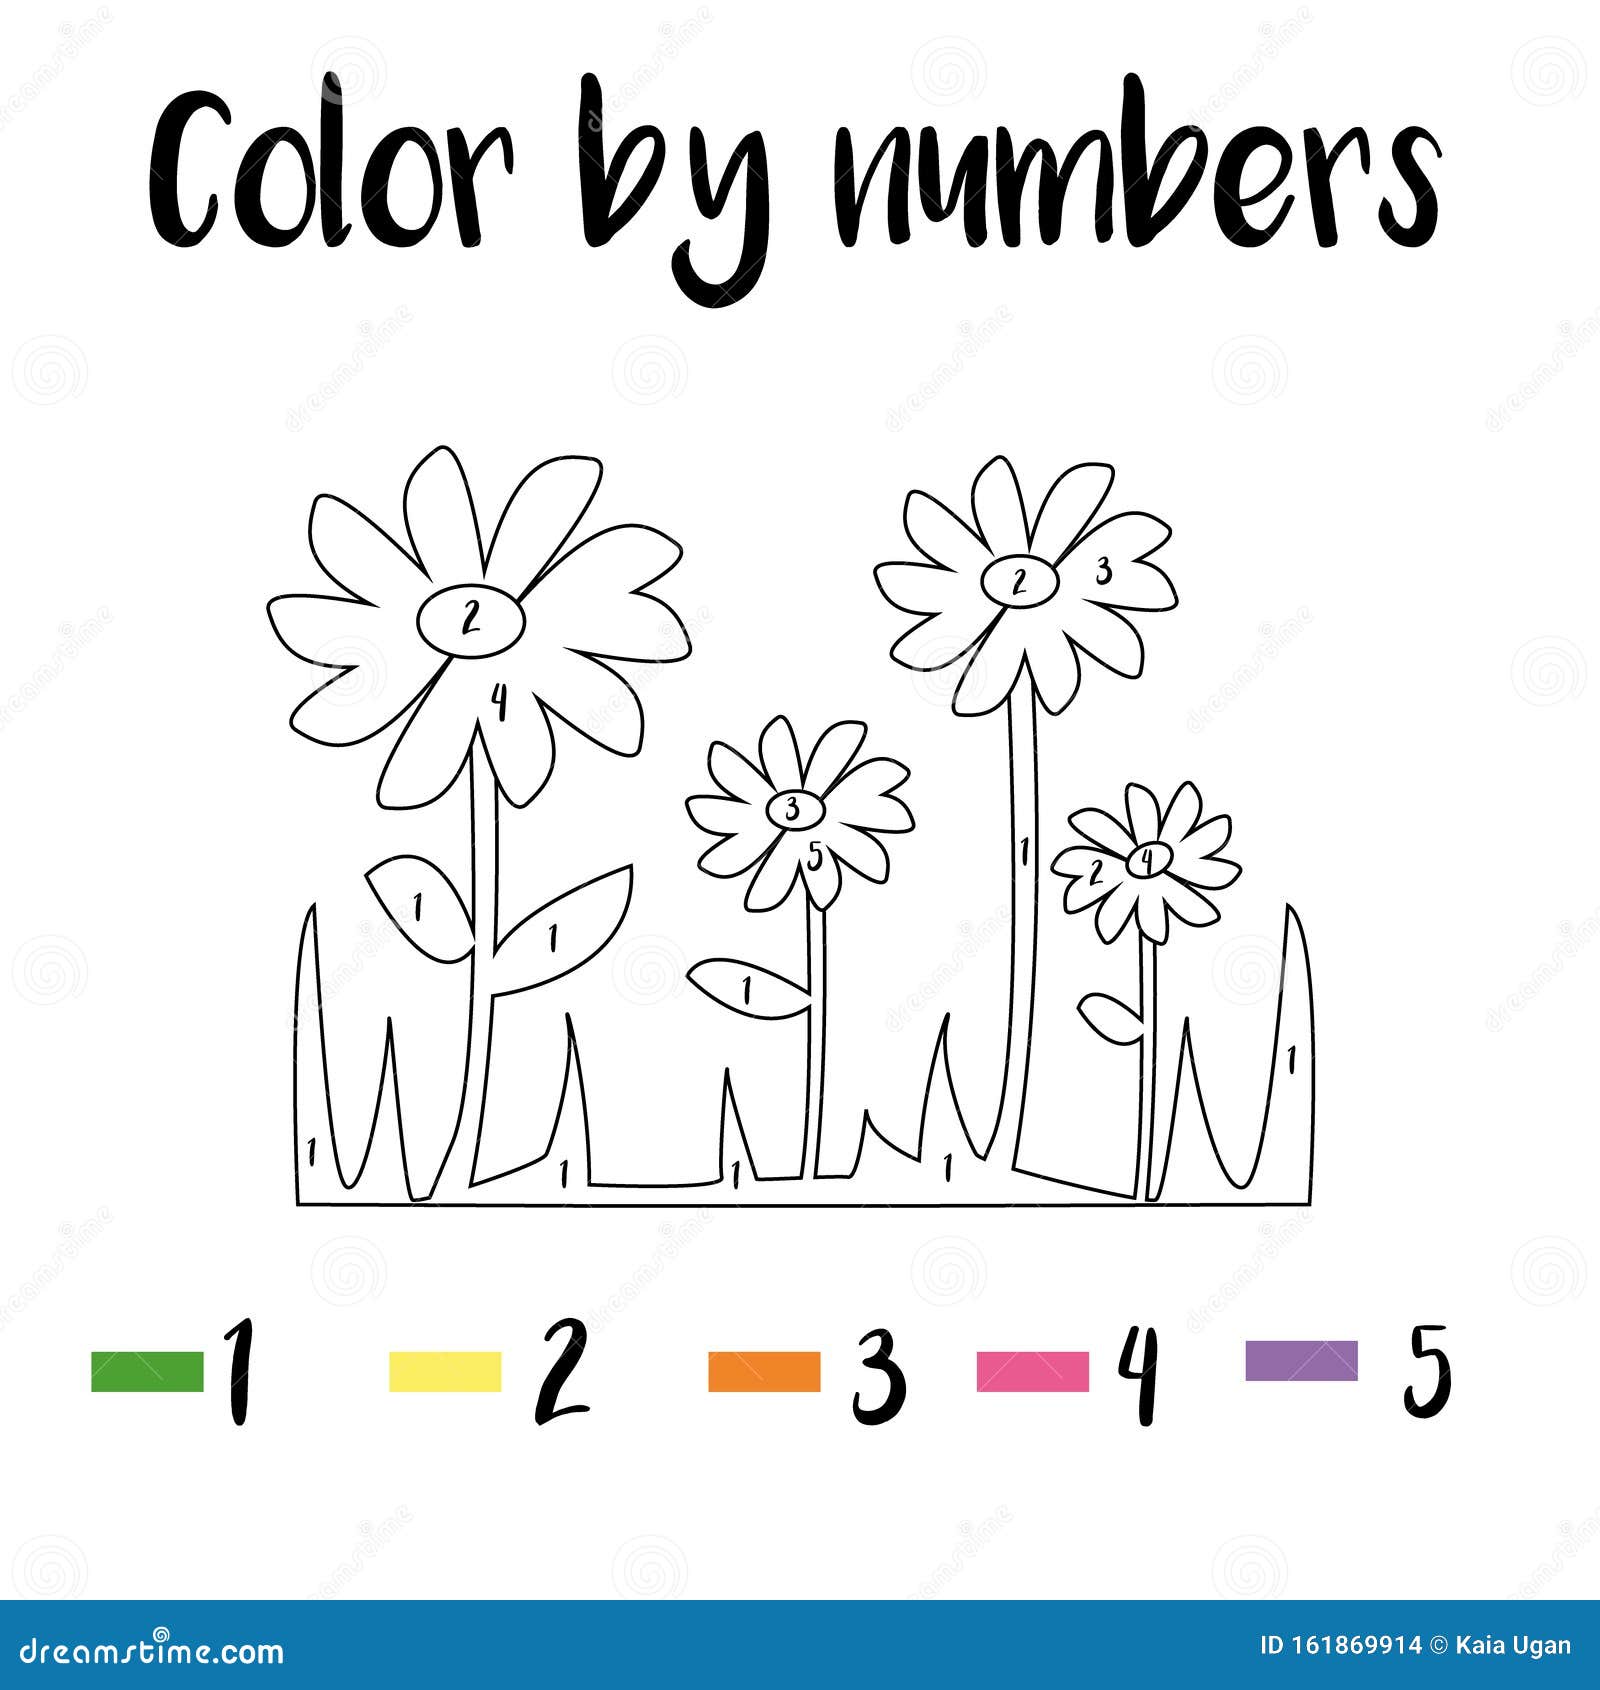 Coloring page with flowers color by numbers educational children game drawing kids activity printable sheet animals theme stock vector